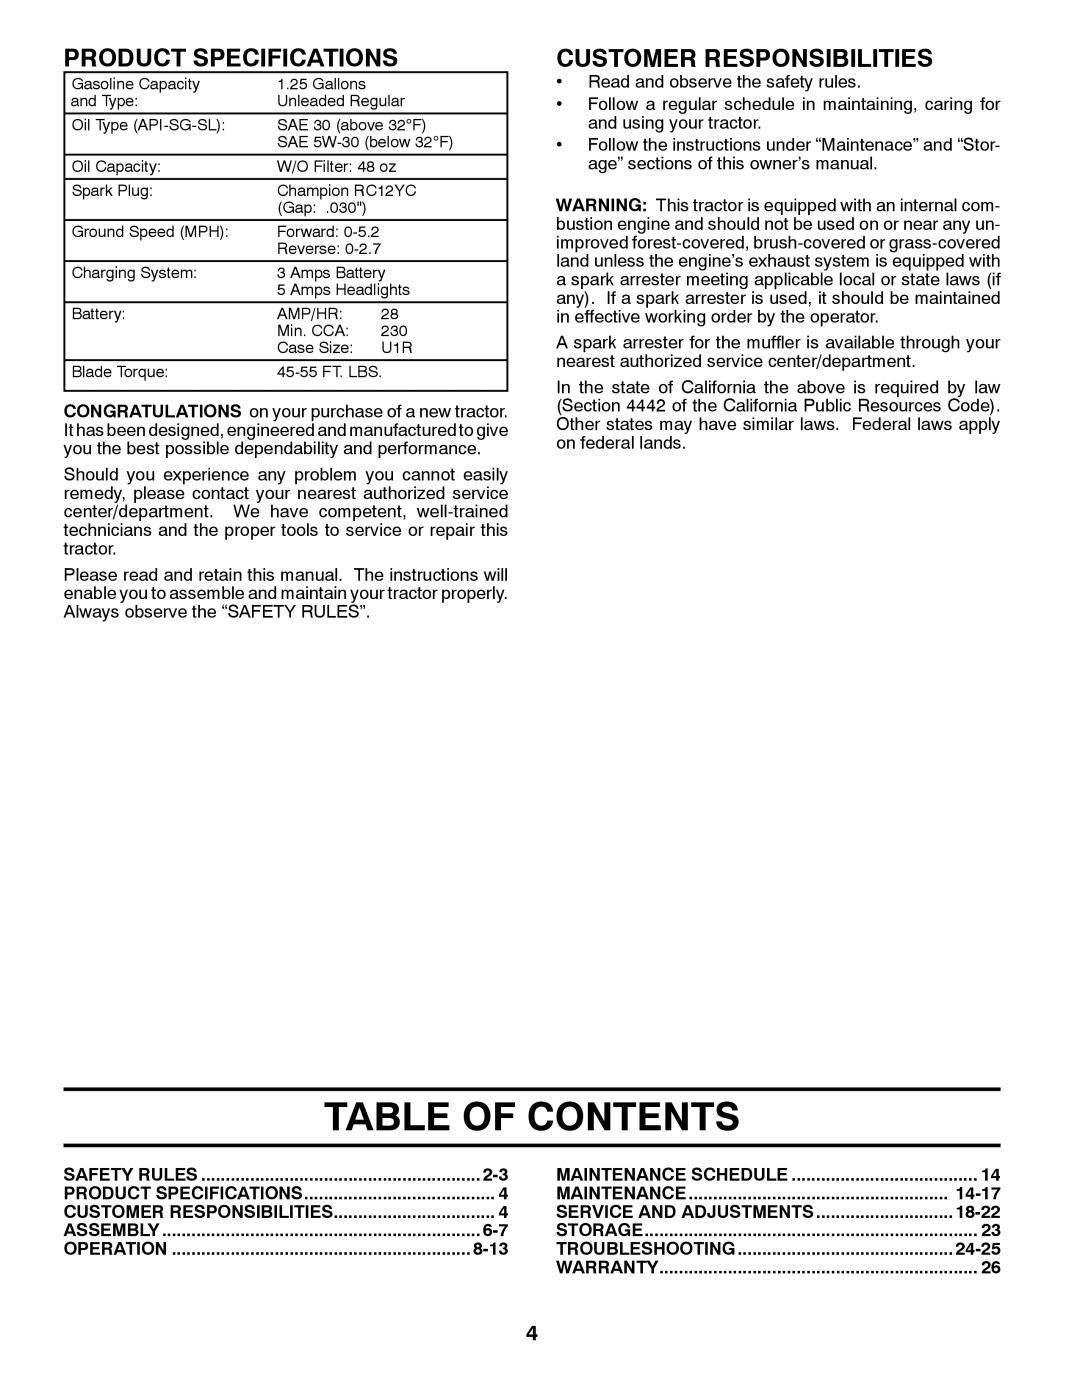 Poulan 96012008600 manual Table Of Contents, Product Specifications, Customer Responsibilities 